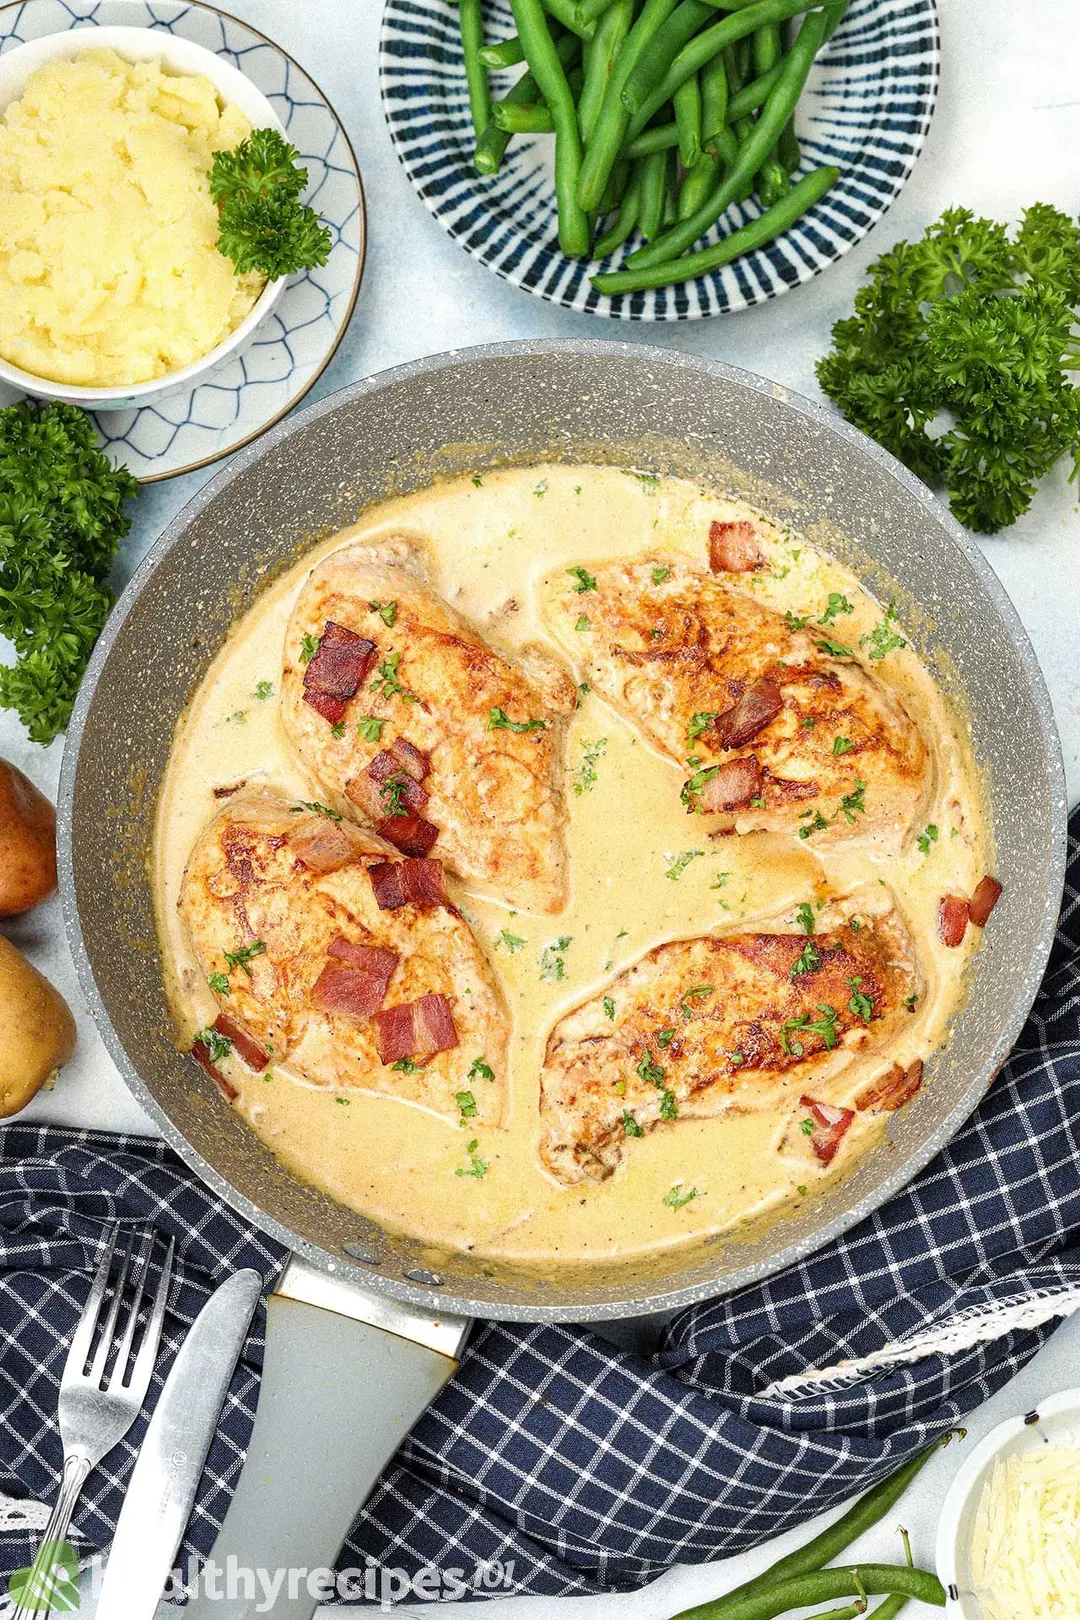 A large pan containing four pieces of cooked chicken breasts and small bacon pieces drenched in a pale yellow cream sauce